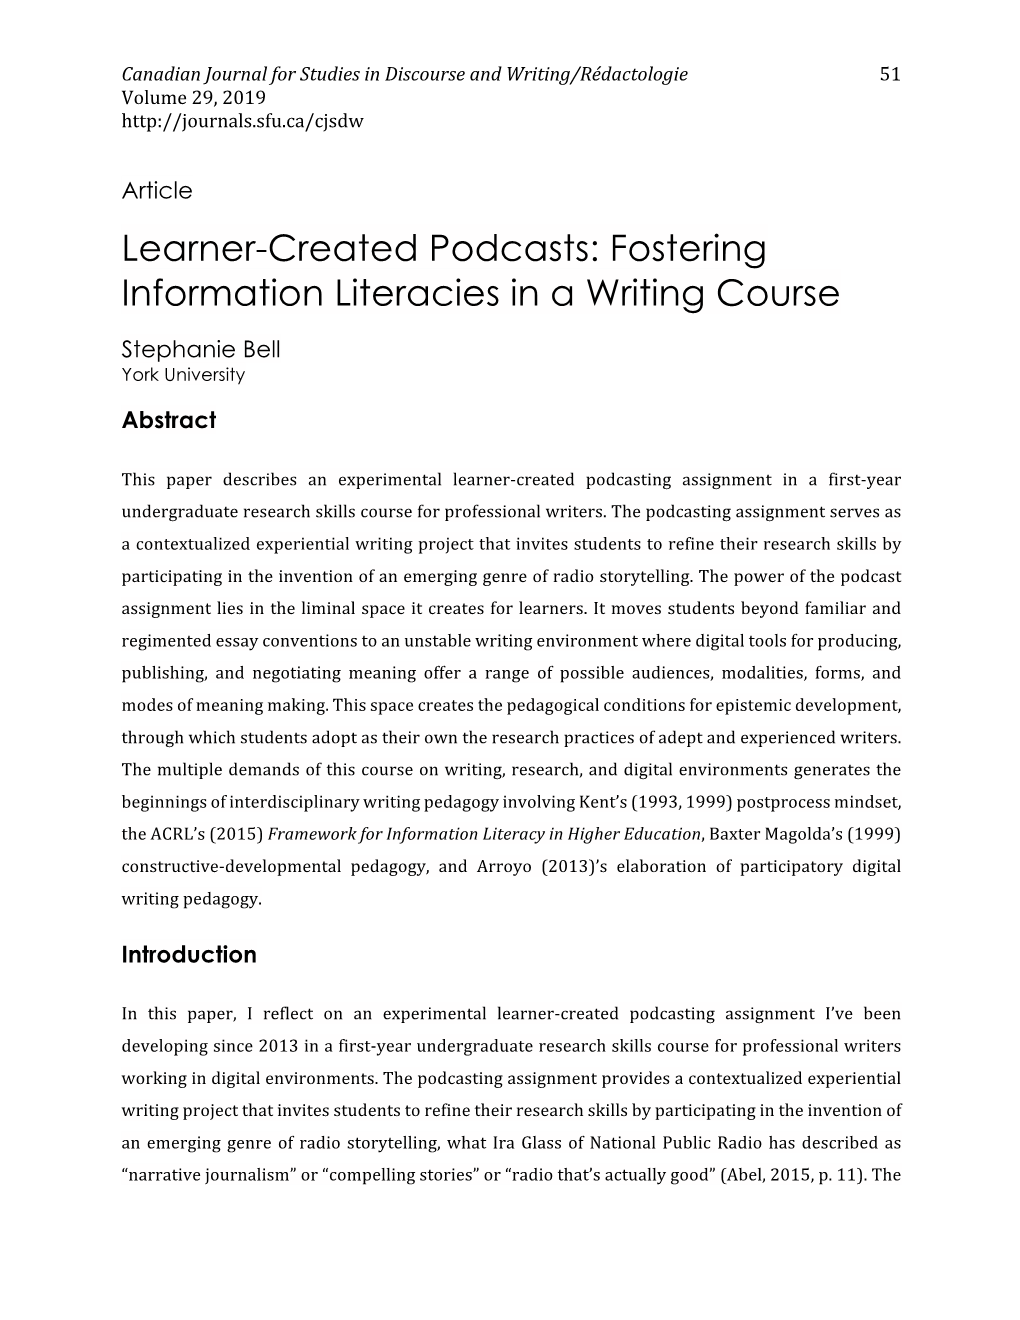 Fostering Information Literacies in a Writing Course